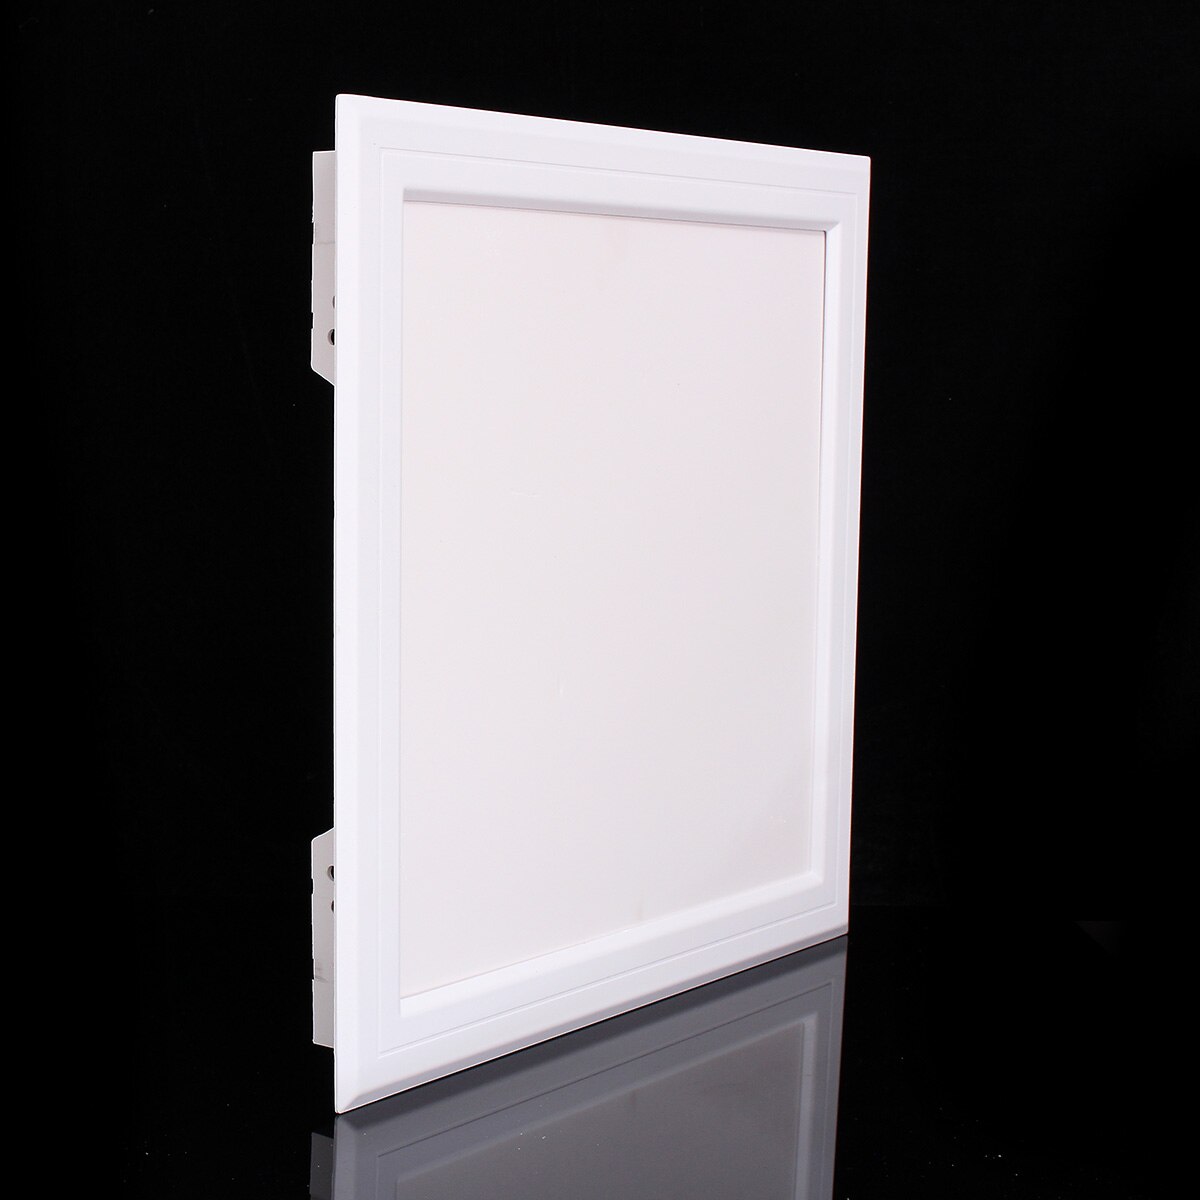 400x400mm Wall Ceiling Access Panel ABS White Inspection Plumbing Wiring Door Revision Hatch Cover